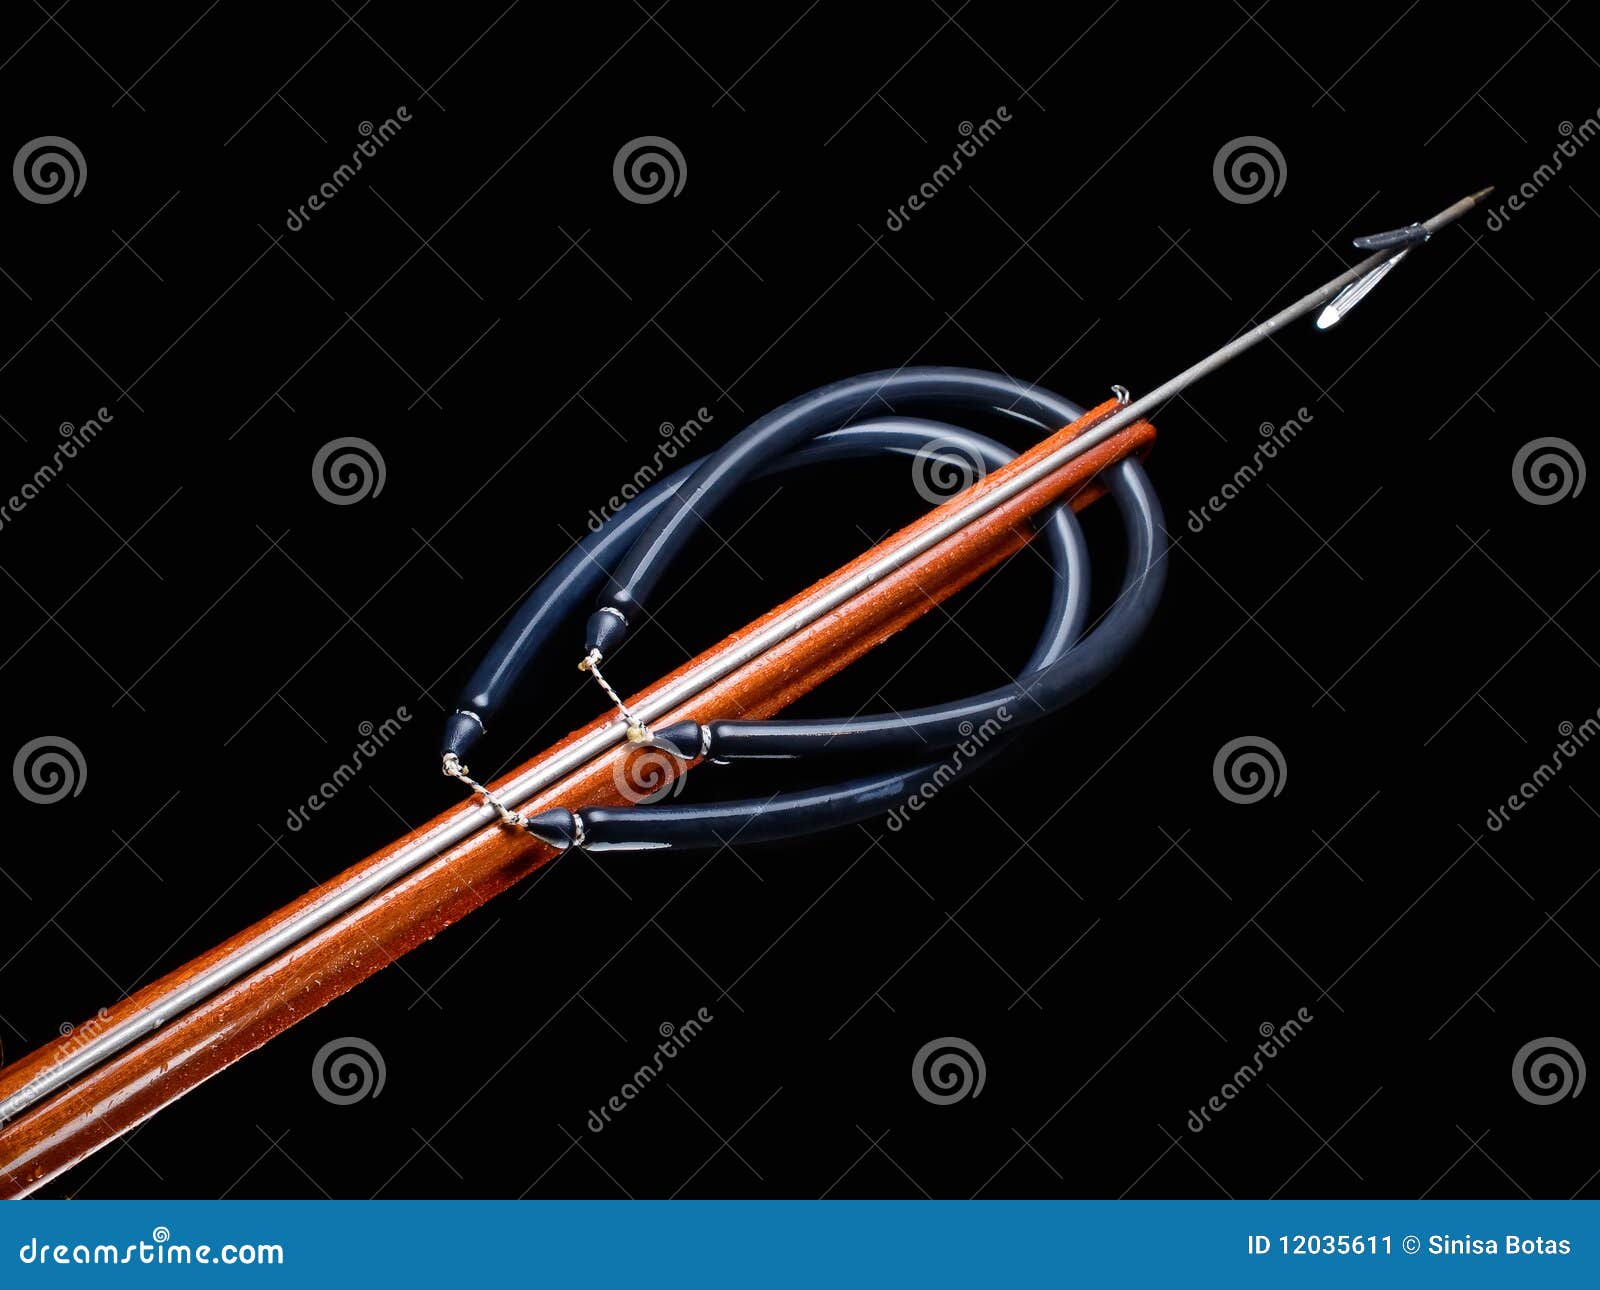 Wooden spear gun stock image. Image of leisure, catch - 12035611